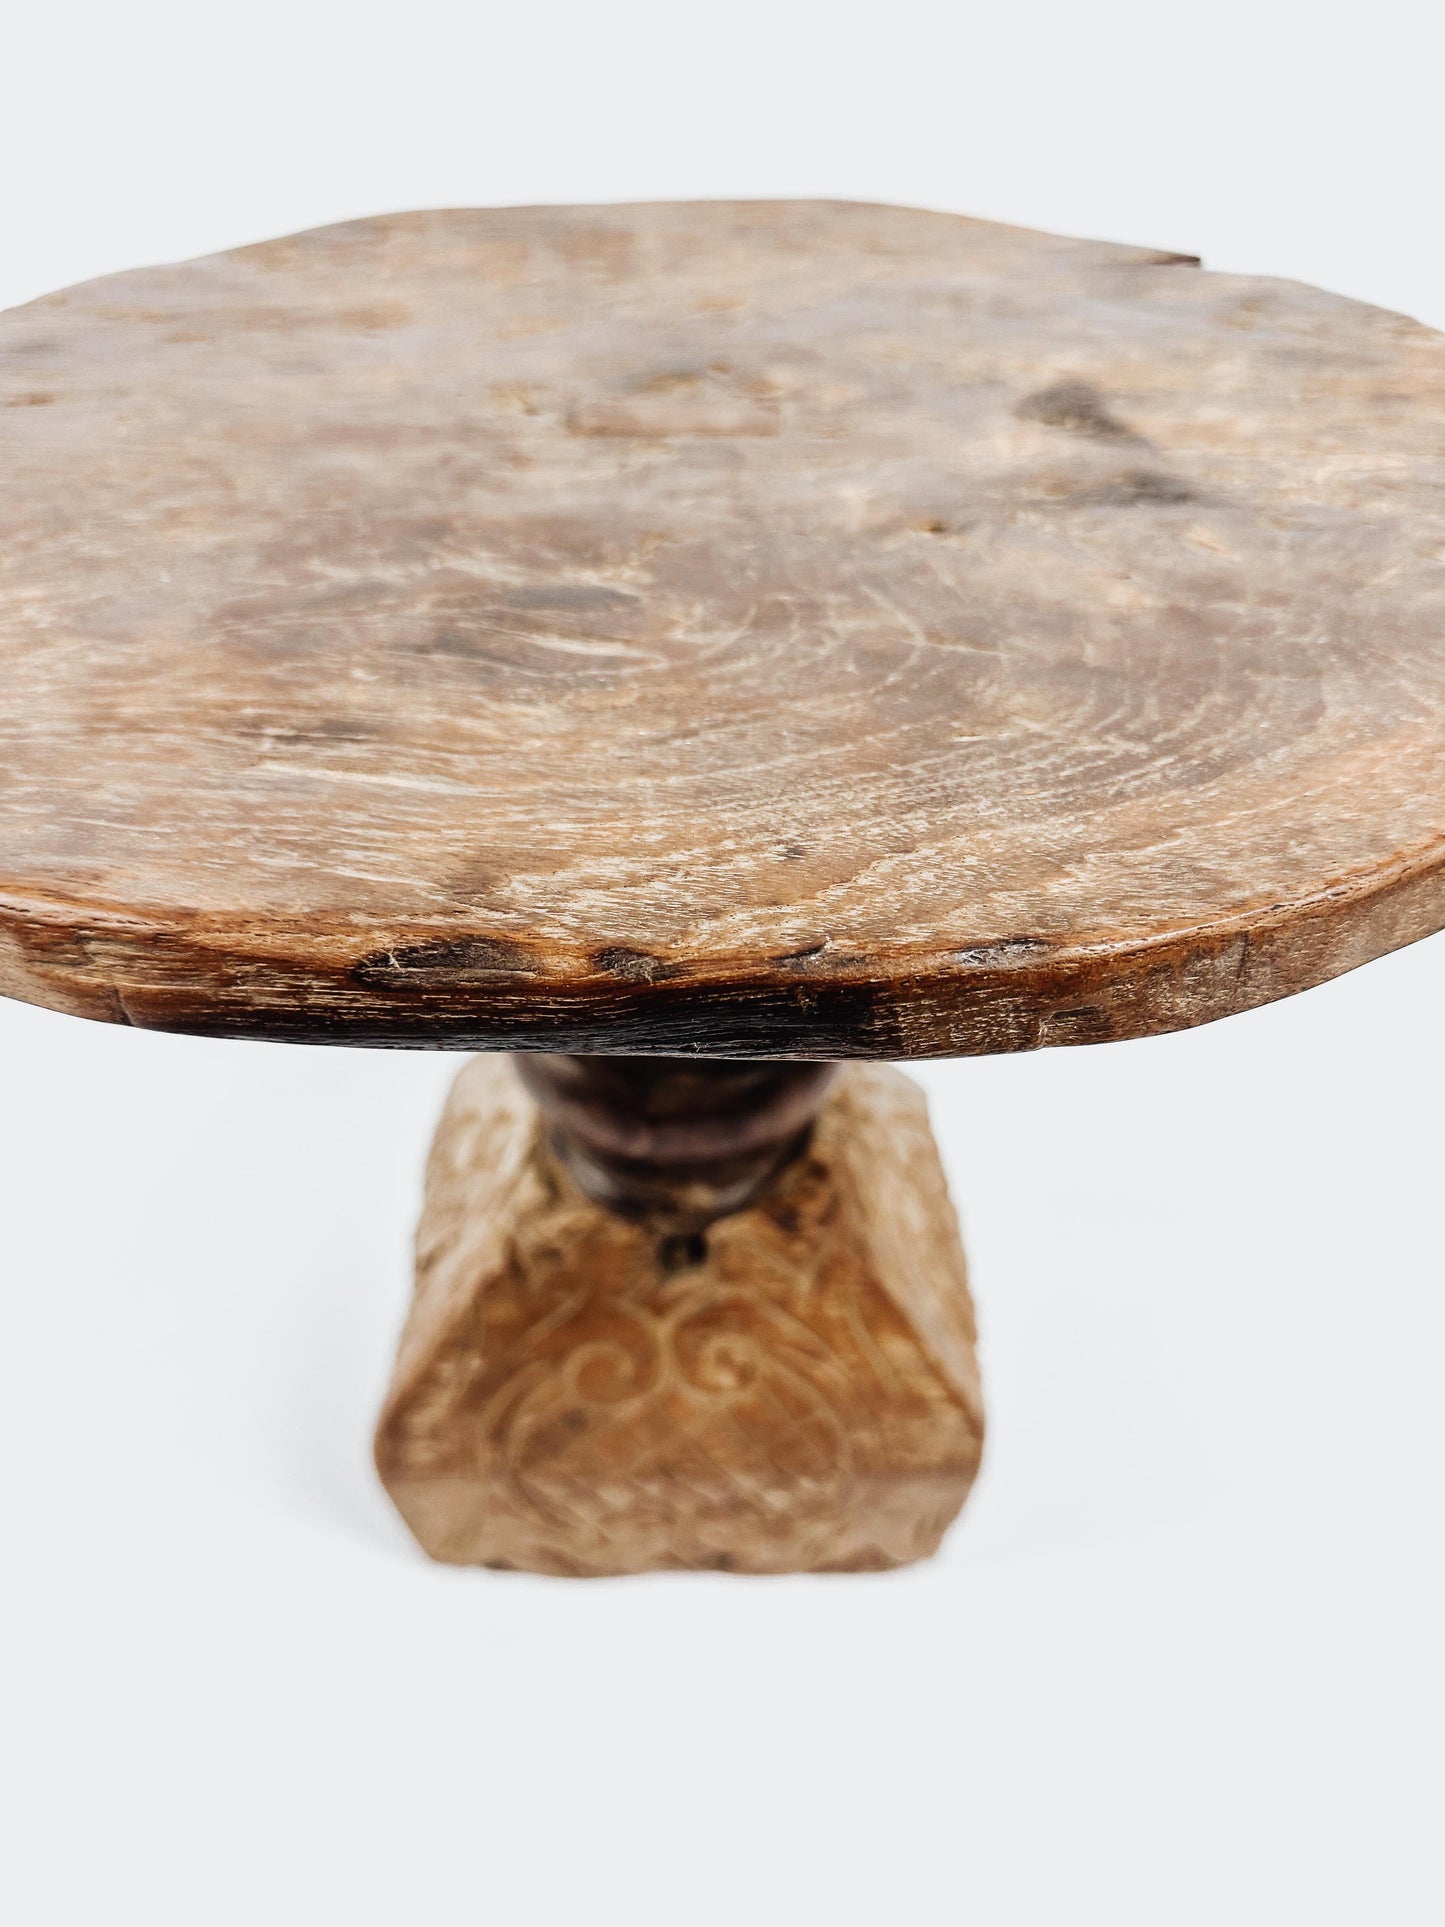 The teak round side table